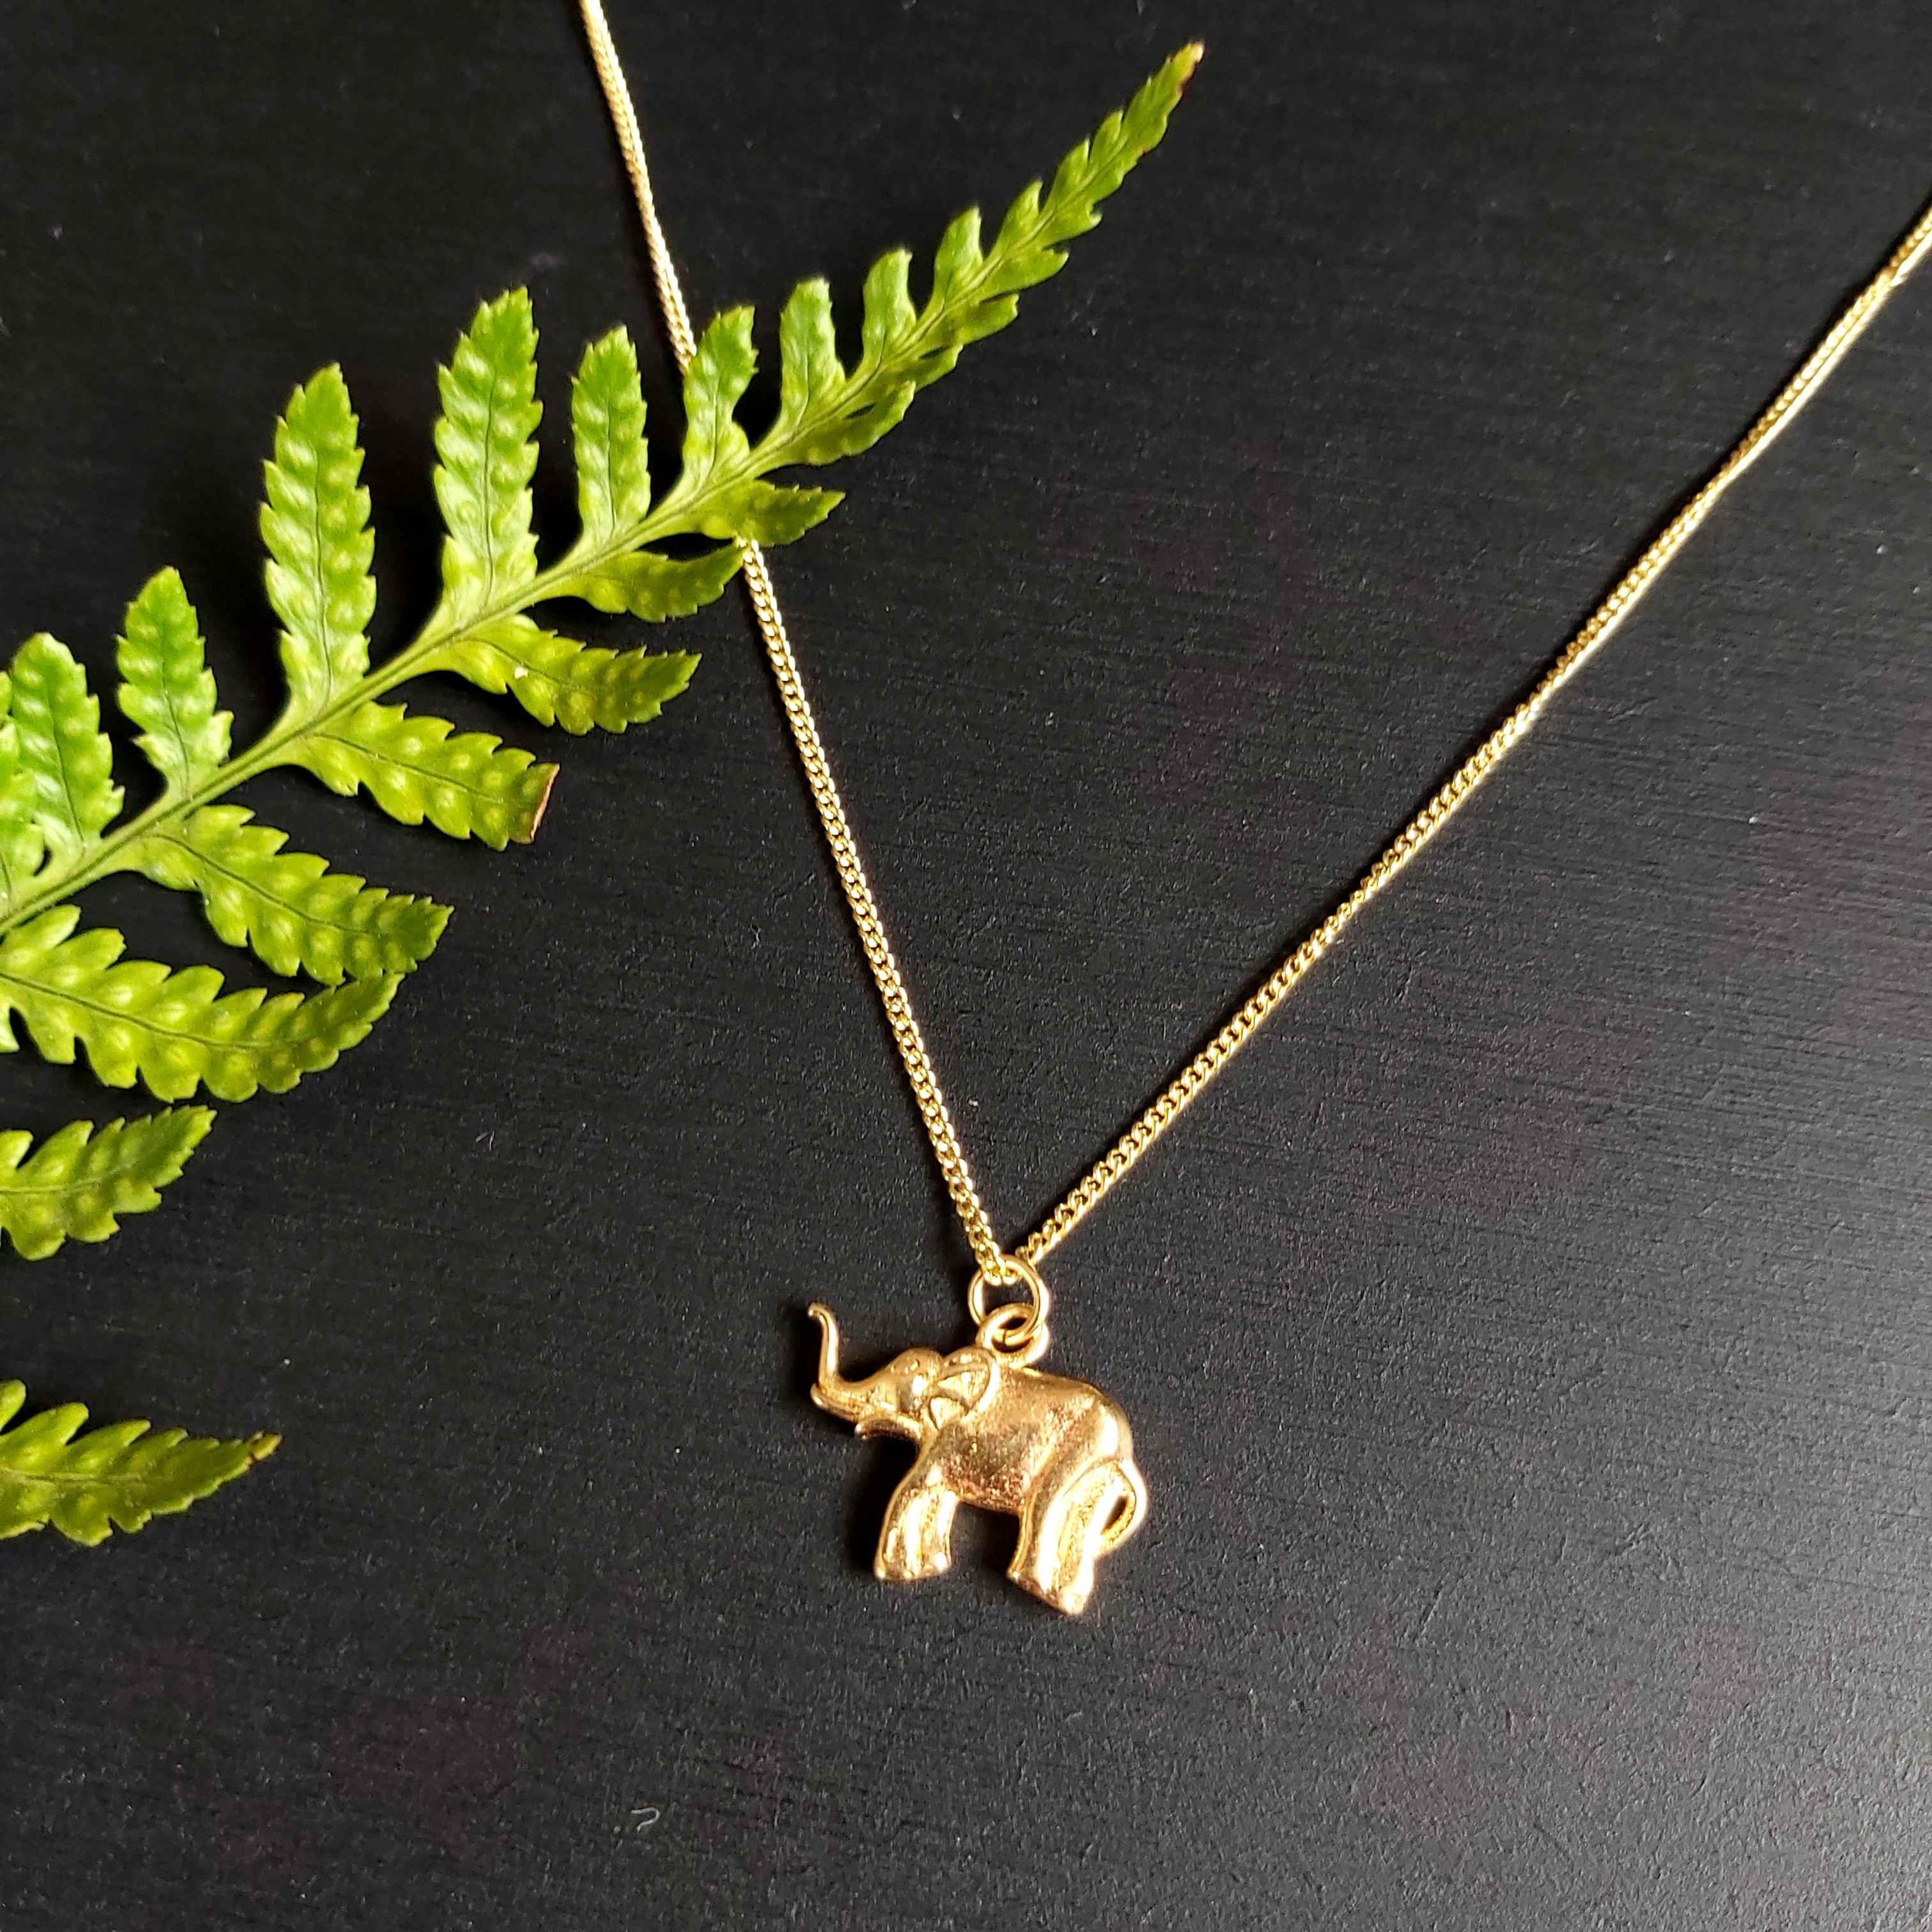 Elephant necklace - ethically made - gold or silver - good luck pendant -  fair trade jewellery — The Geographer store